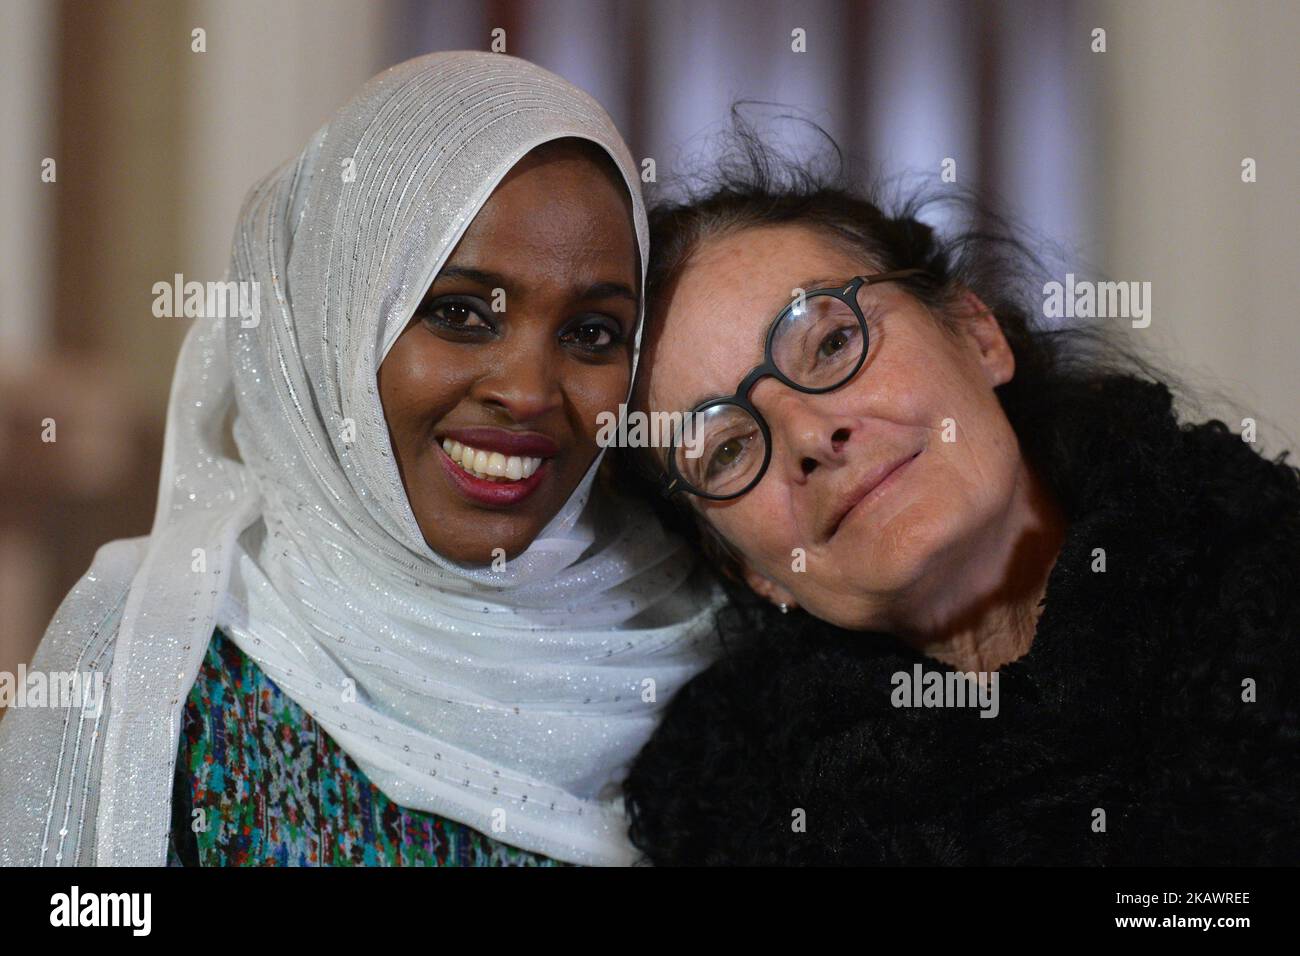 Ifrah Ahmed (Left) with Mary McGuckian, the film Director-Writer-Producer, during an on set photo call, which has just commenced in Dublin for the Pembridge Pictures and Umedia production of ‘A Girl from Mogadishu’ – a true story based on the testimony of Ifrah Ahmed. Born into a refugee camp in war-torn Somalia, Ifrah was trafficked to Ireland as a teenager. Recounting her traumatic childhood experiences of Female Genital Mutilation / Cutting (FGM/C) when applying for refugee status, she was again traumatized and decided to devote her life to the eradication of the practice. Ifrah emerged as Stock Photo